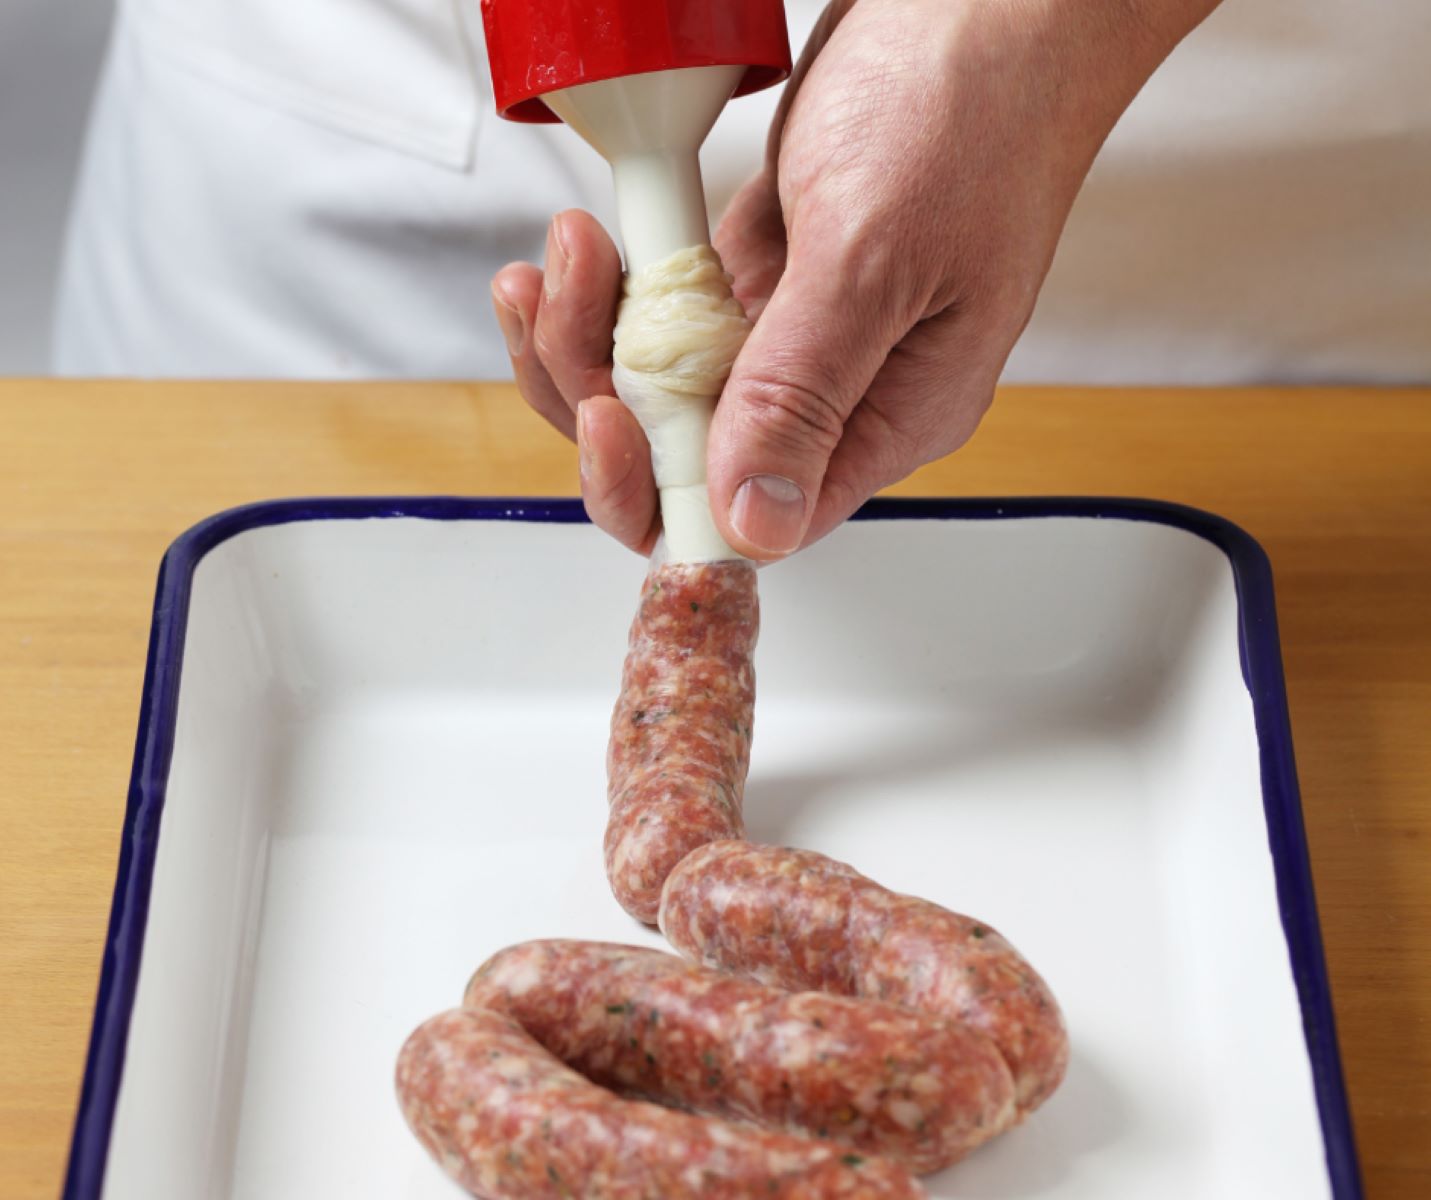 How To Store Sausage Casings